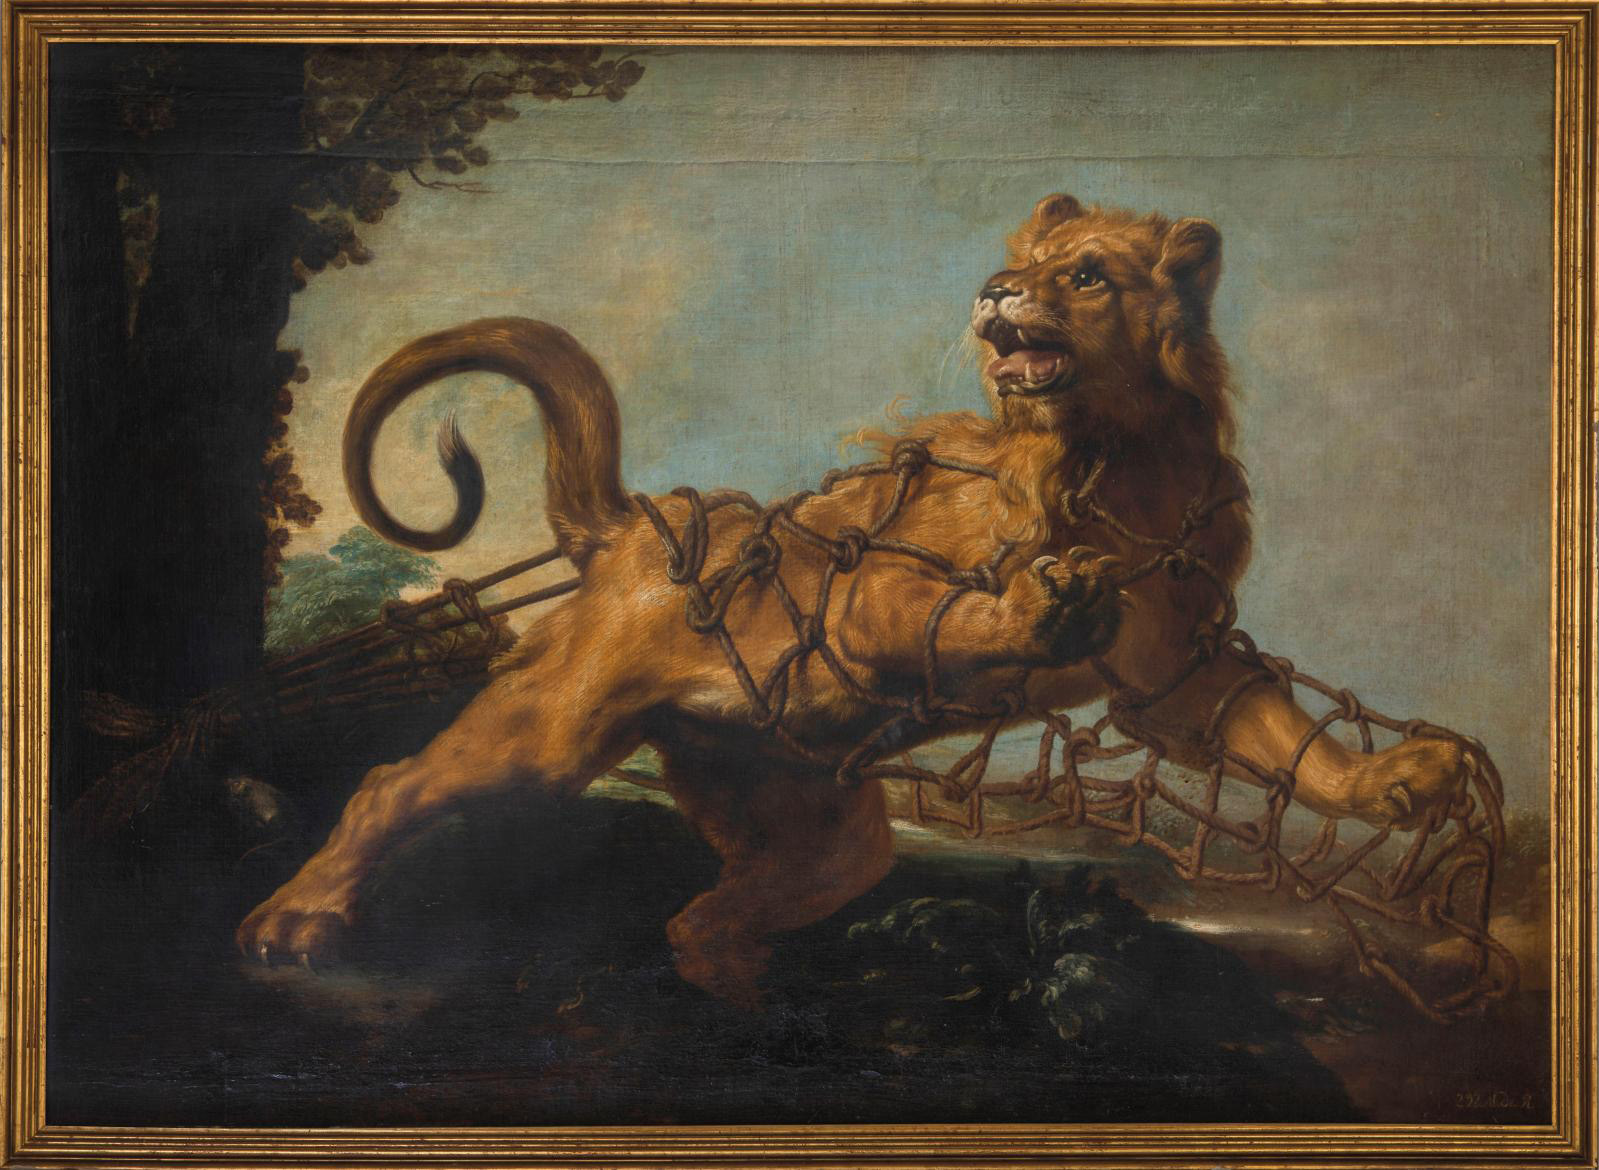 The Lion and the Rat According to Frans Snyders